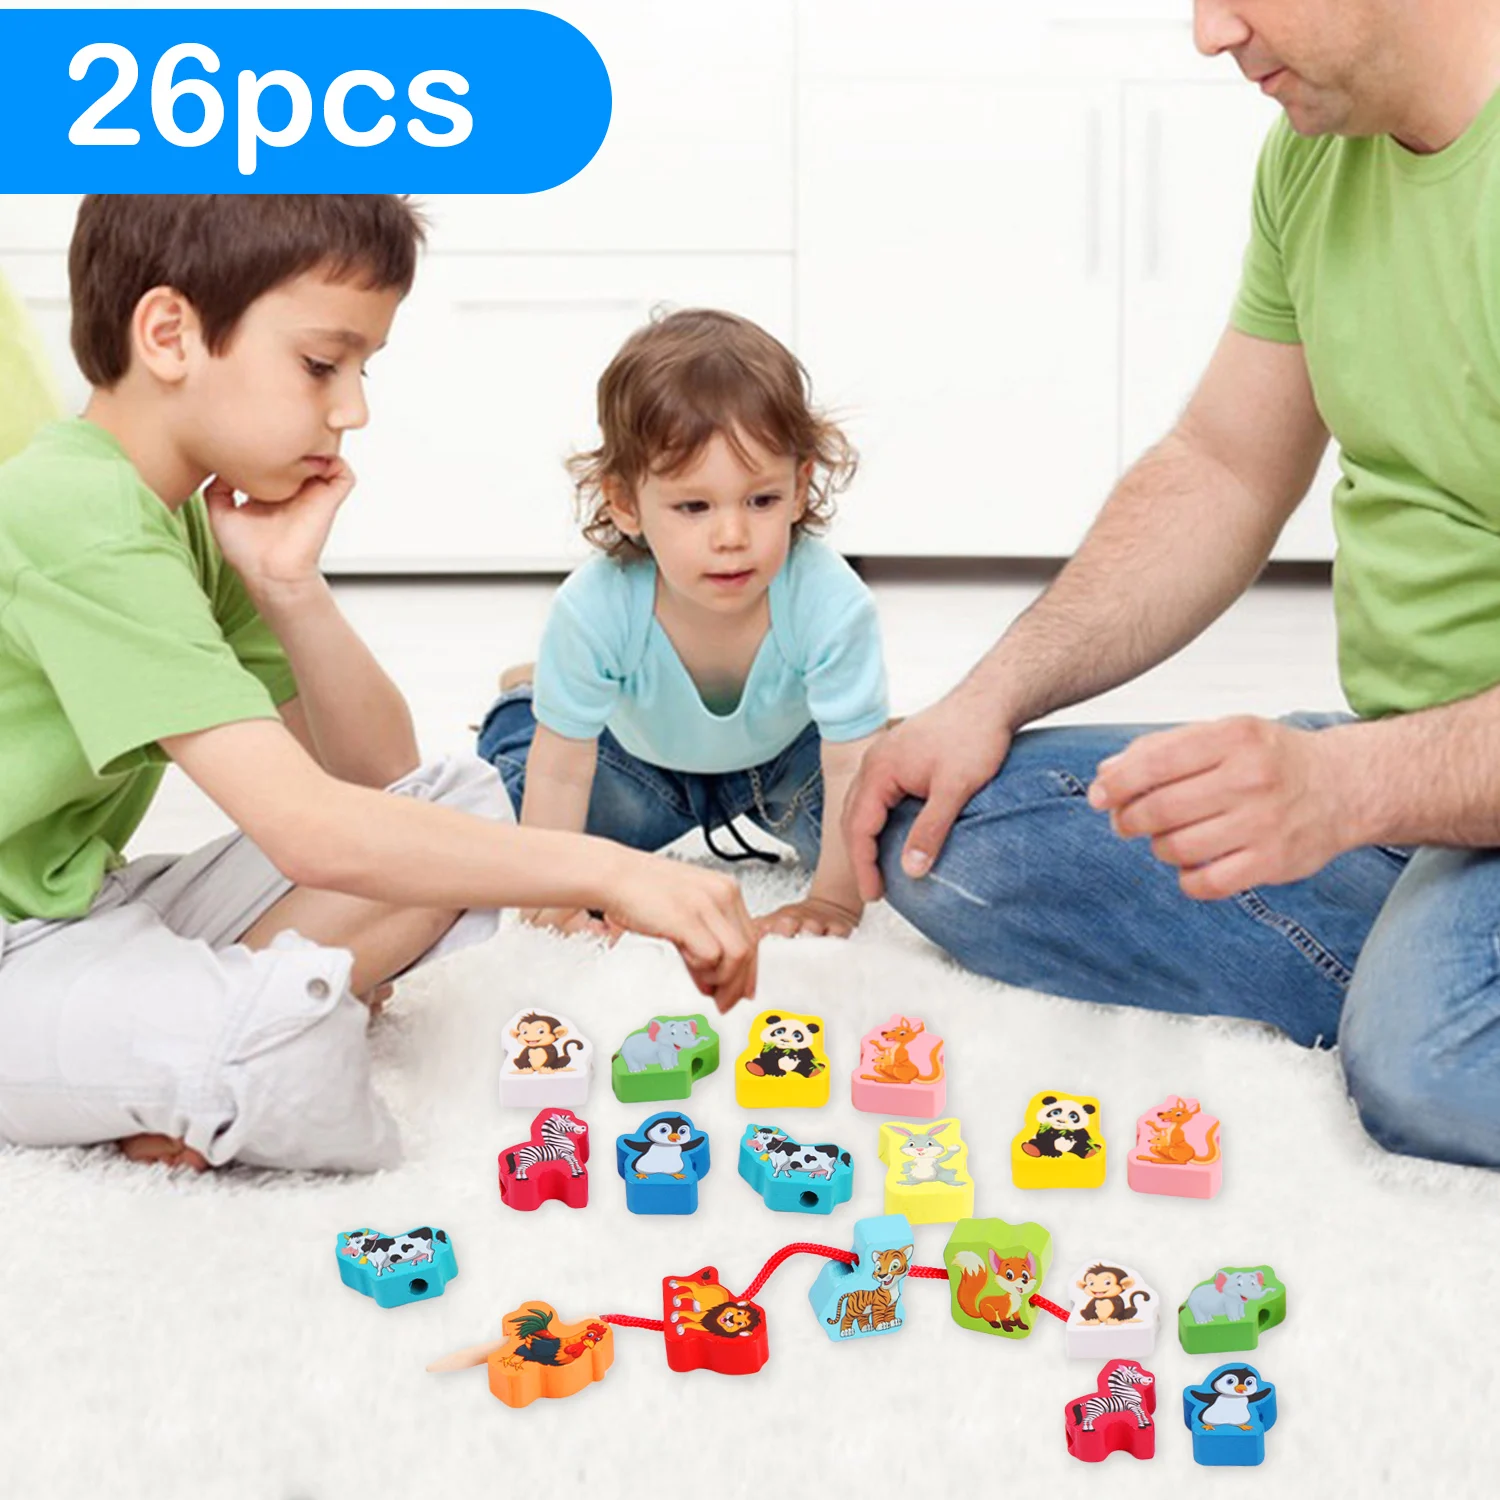 Kids 26pcs Montessori DIY Colored Wooden Cartoon Animals Shaped String Threading Lacing Beads Beading Game Jewelry Making Toys